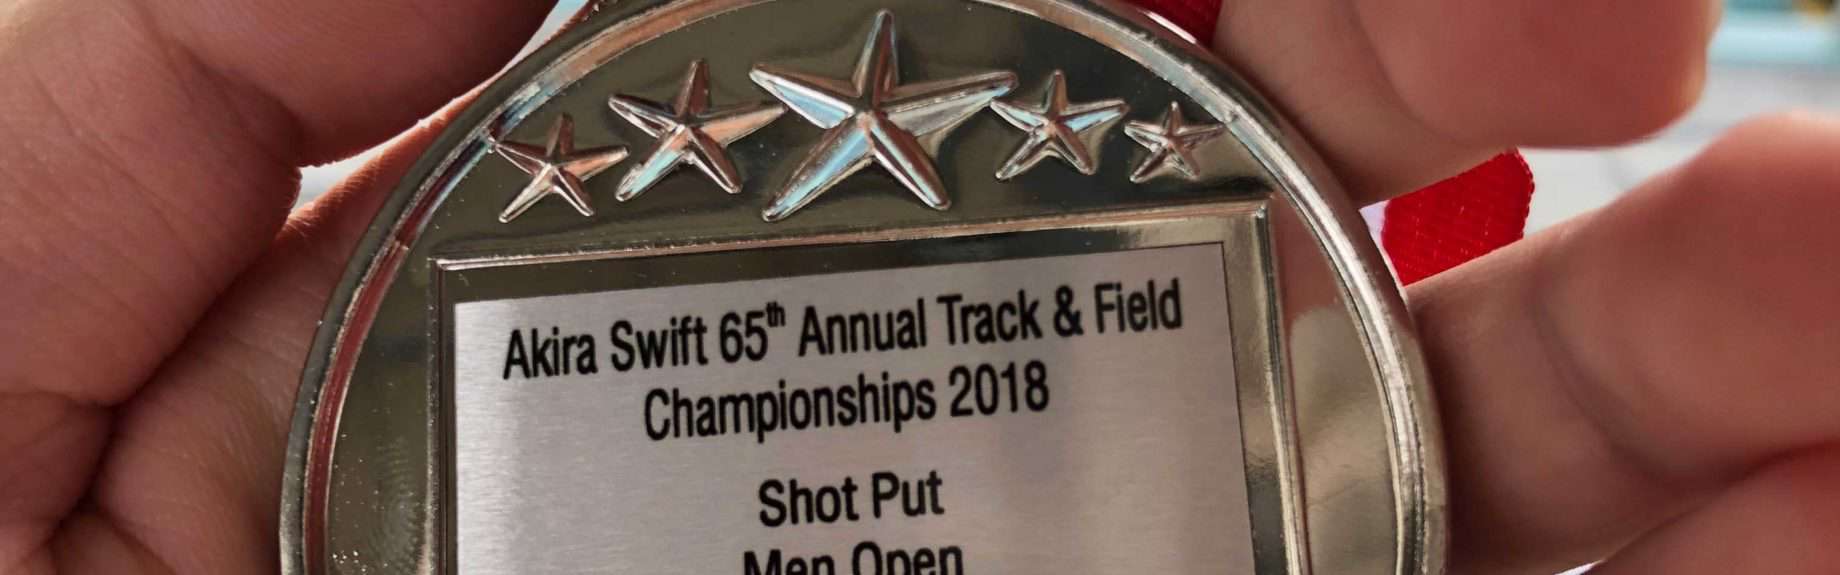 Akira Swift 65th Annual Track And Field Championships 2018